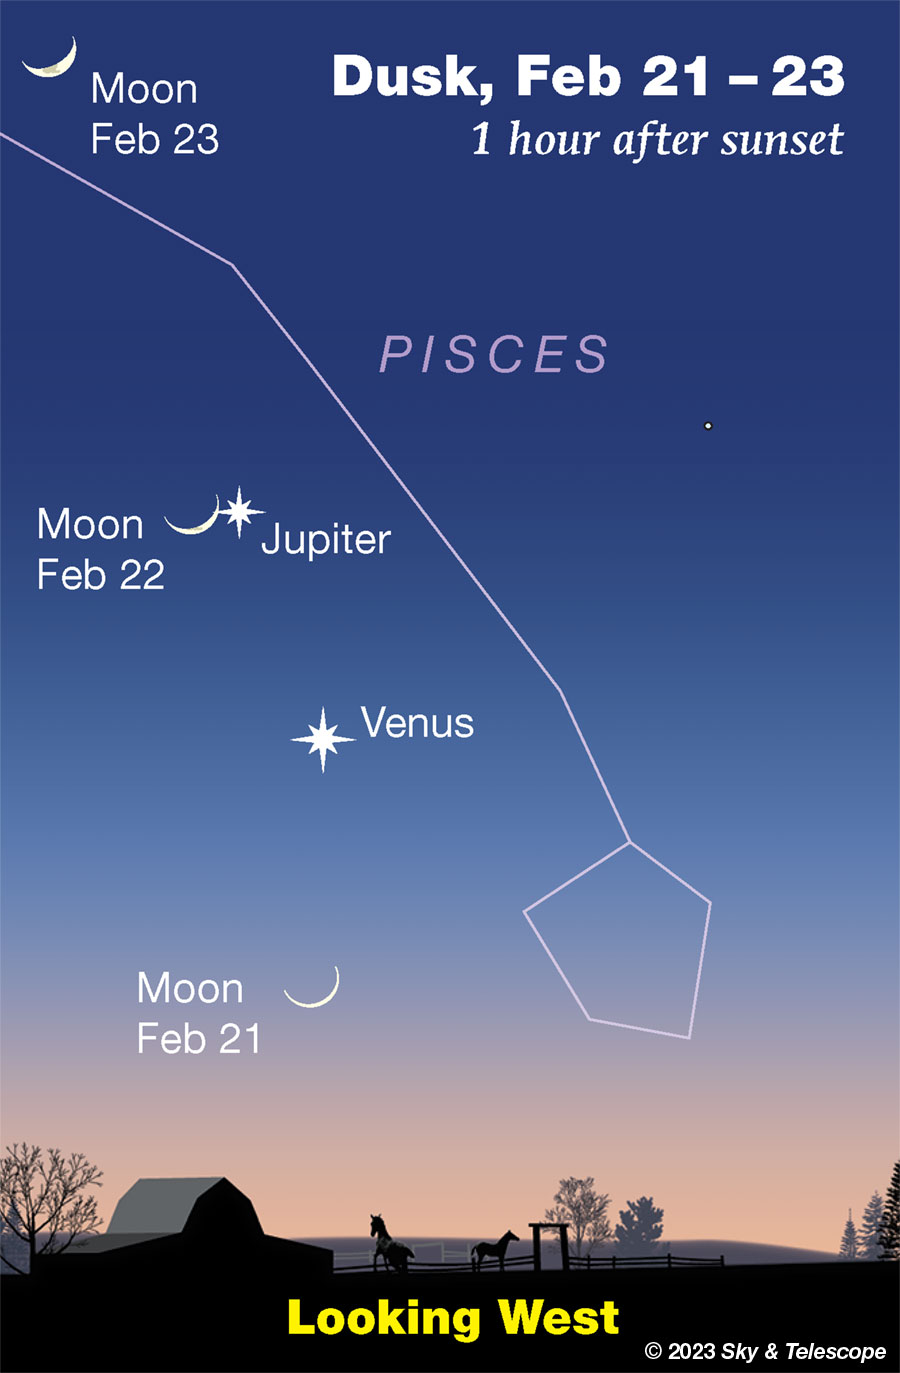 The waxing crescent Moon pairs up with Jupiter in twilight on Feb. 22, 2023. Venus is below them.